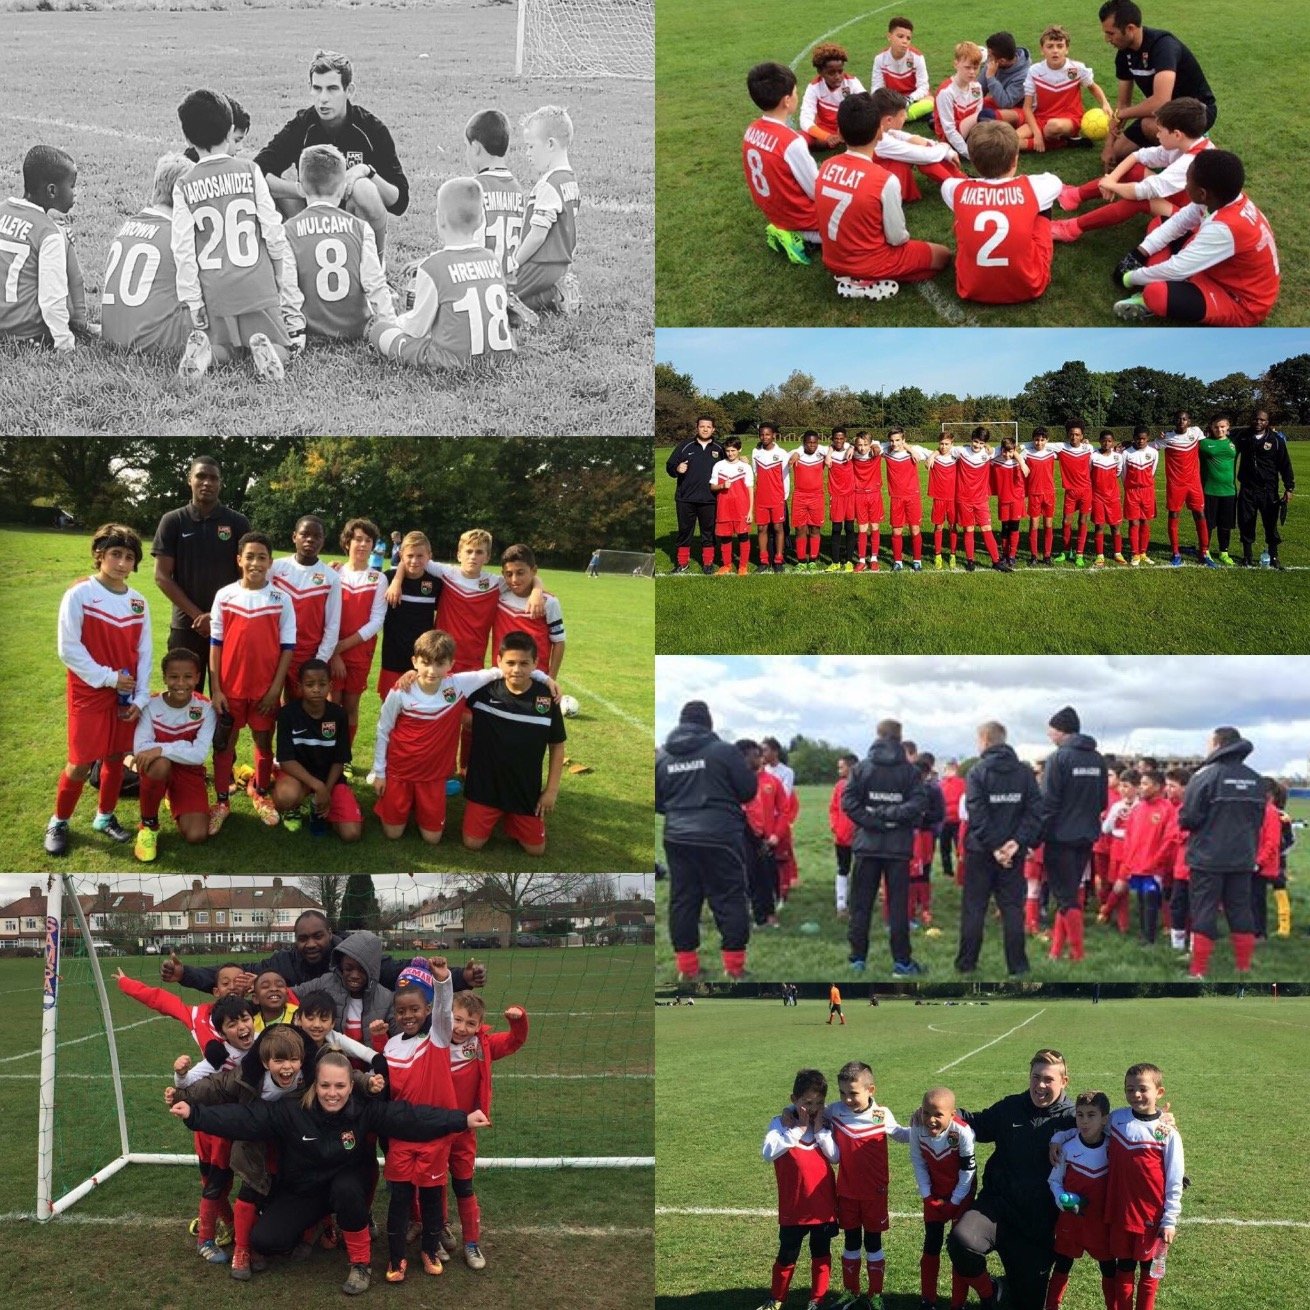 Official Twitter account of London Athletic FC, #football #grassrootsfootball #middlesex #edgware #youthfootball